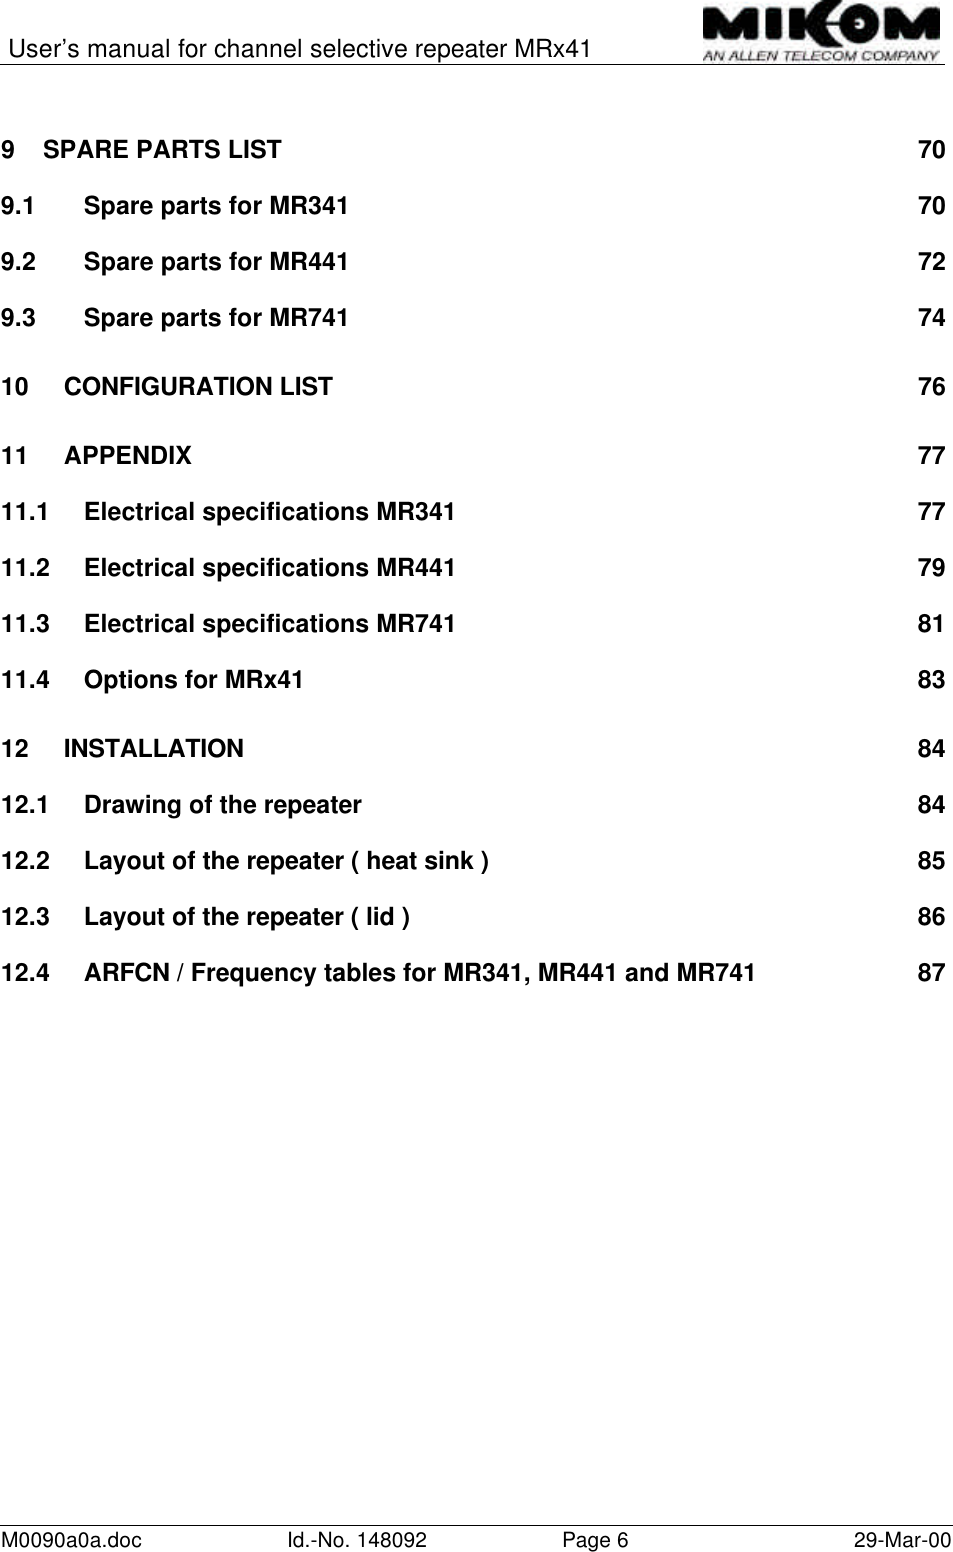 User’s manual for channel selective repeater MRx41M0090a0a.doc Id.-No. 148092 Page 629-Mar-009SPARE PARTS LIST 709.1 Spare parts for MR341 709.2 Spare parts for MR441 729.3 Spare parts for MR741 7410 CONFIGURATION LIST7611 APPENDIX 7711.1 Electrical specifications MR341 7711.2 Electrical specifications MR441 7911.3 Electrical specifications MR741 8111.4 Options for MRx41 8312 INSTALLATION 8412.1 Drawing of the repeater 8412.2 Layout of the repeater ( heat sink ) 8512.3 Layout of the repeater ( lid ) 8612.4 ARFCN / Frequency tables for MR341, MR441 and MR741 87